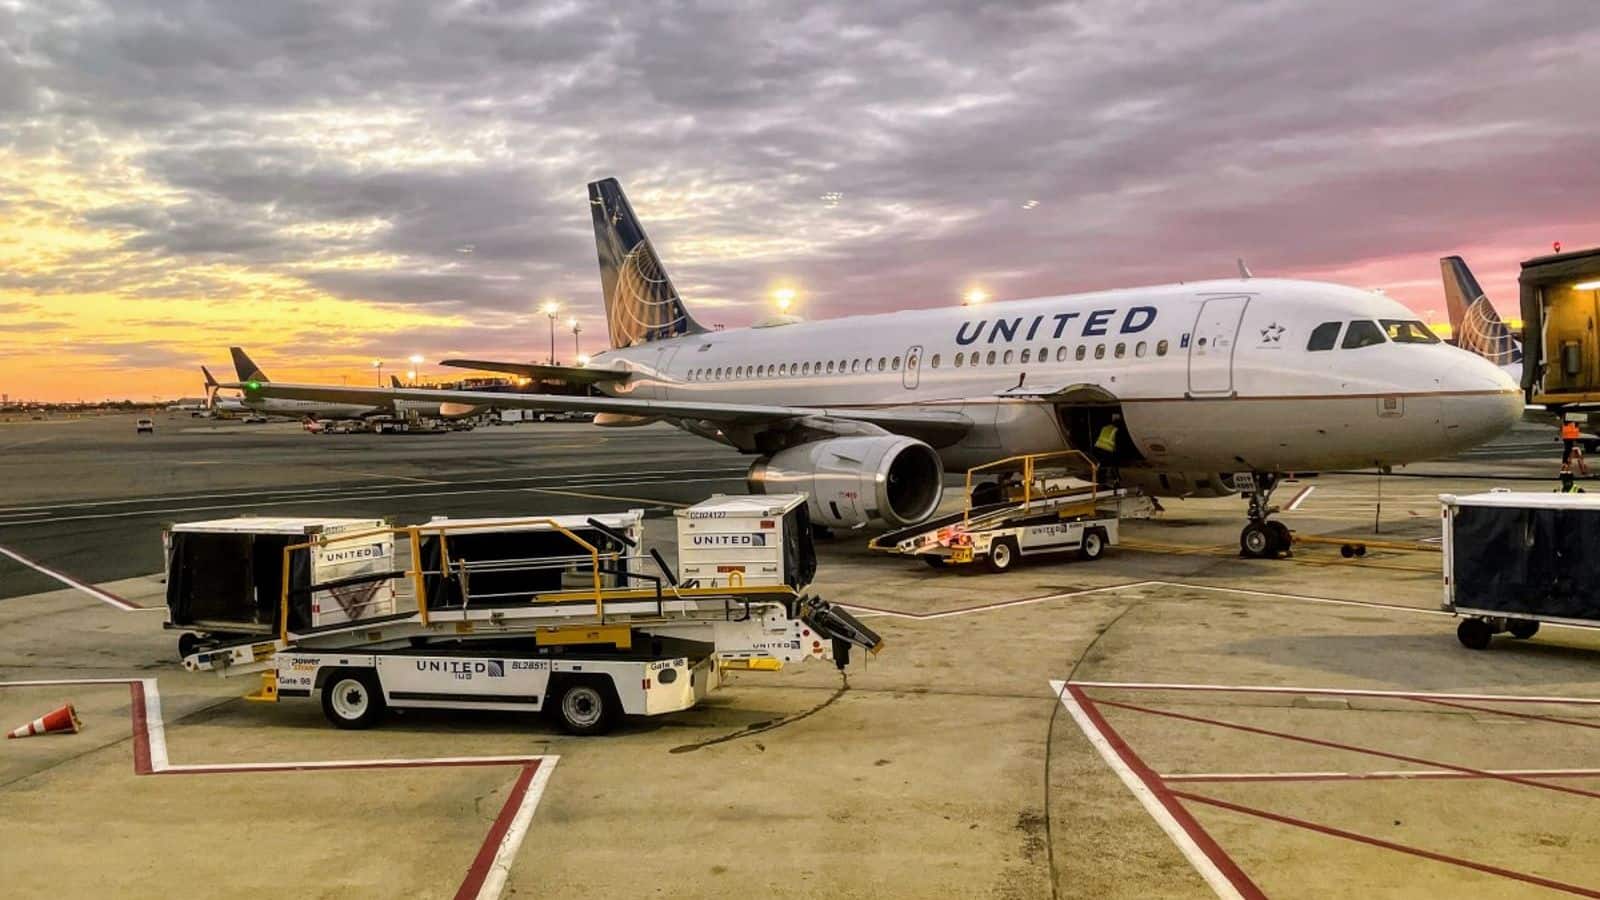 United Airlines utilizing AI to improve flight operations, passenger experience